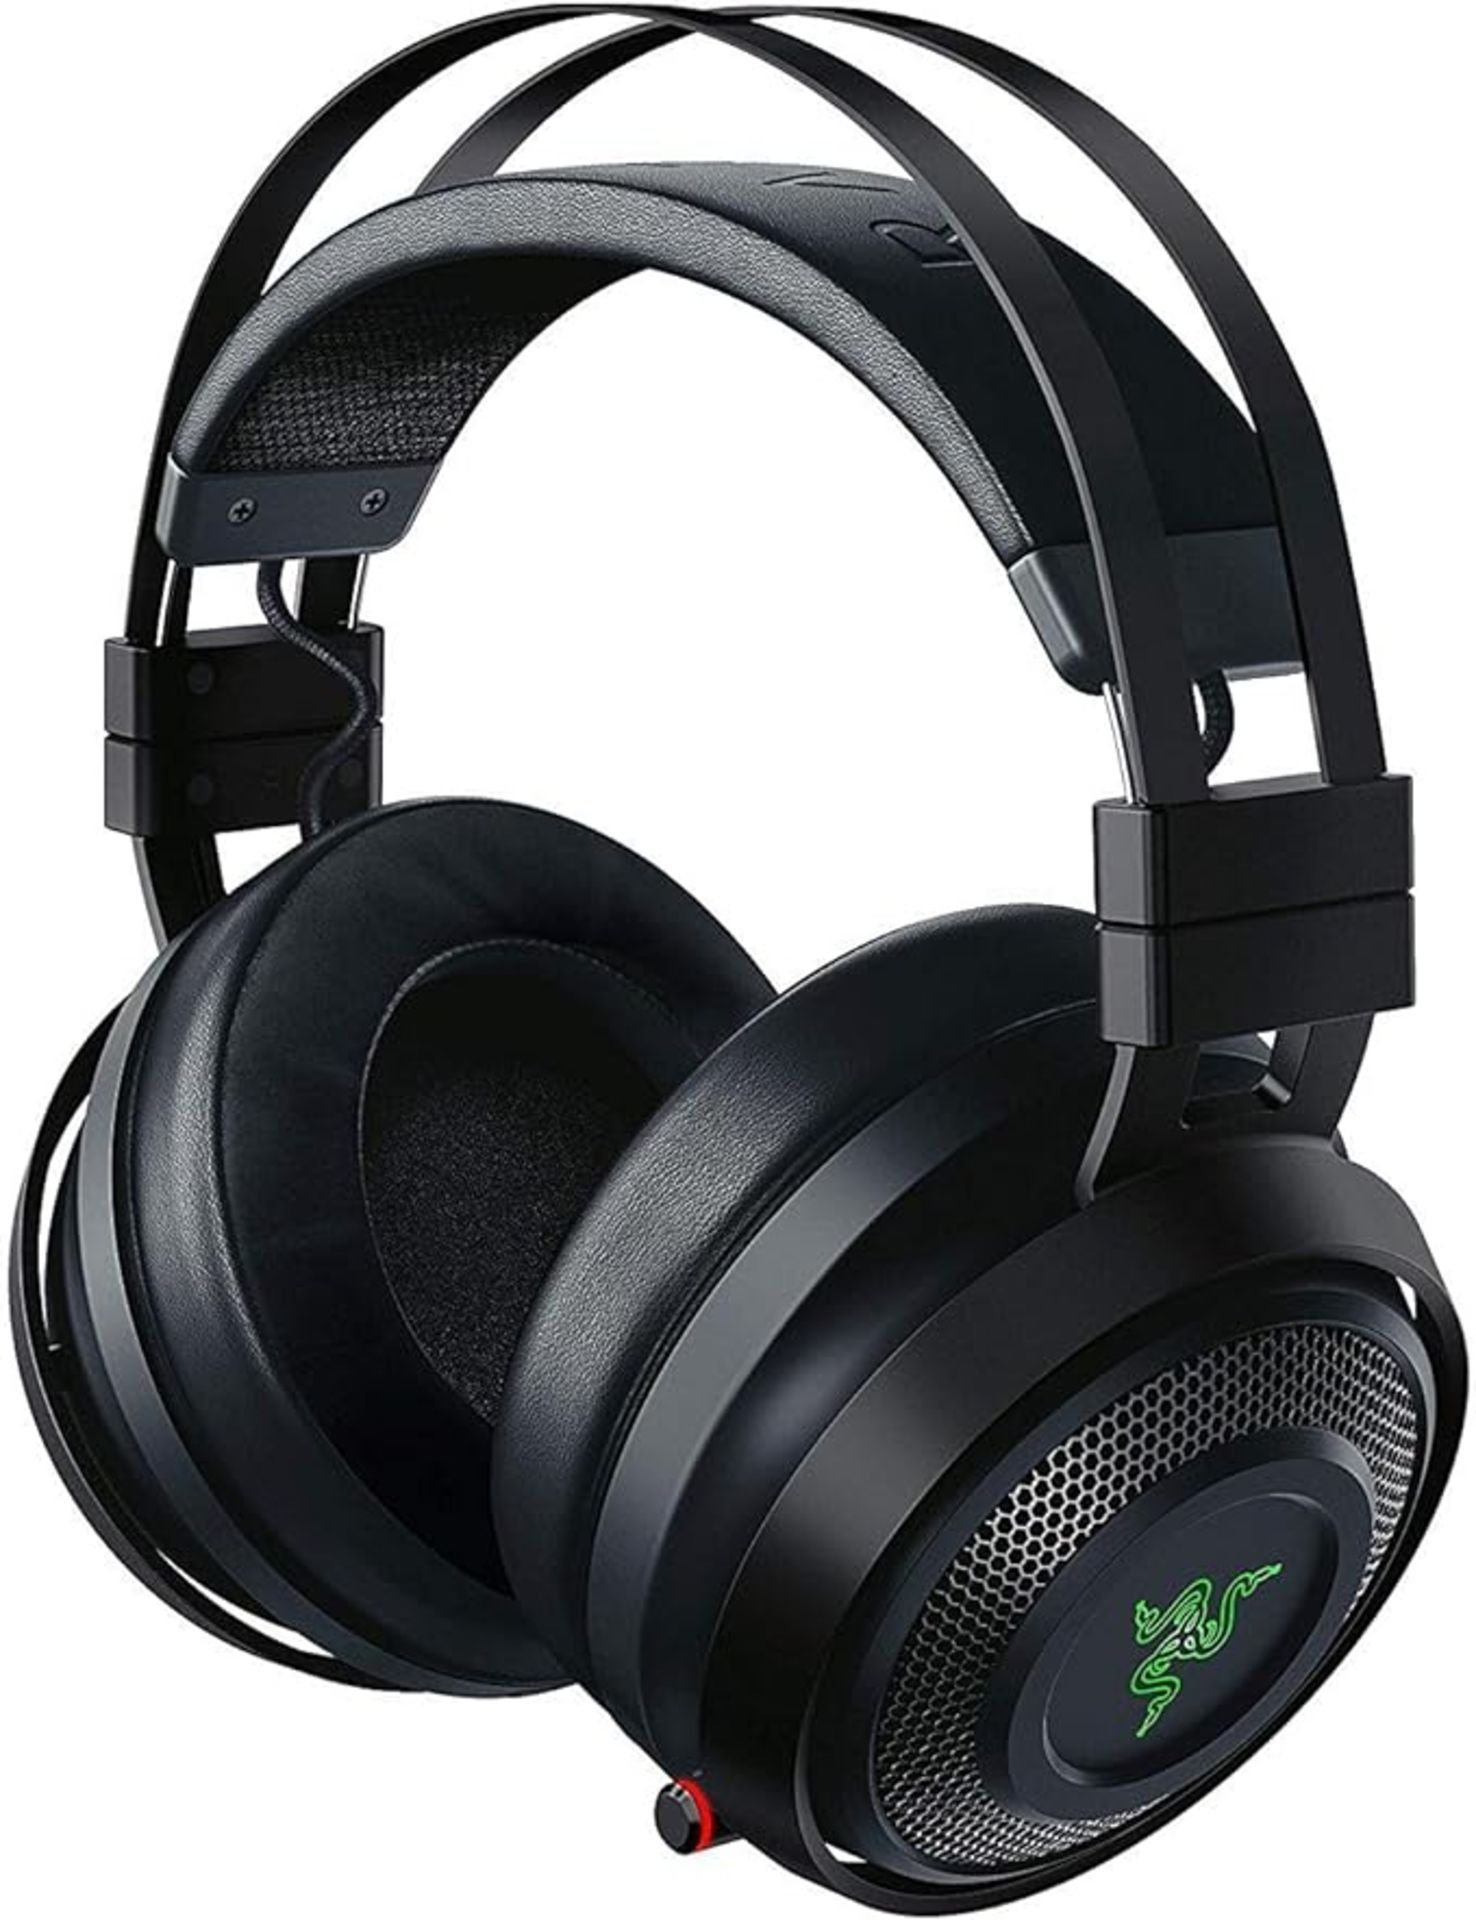 Razer Nari Ultimate Gaming Headset. - BW. RRP £179.99. HyperSense Technology to Feel the Action